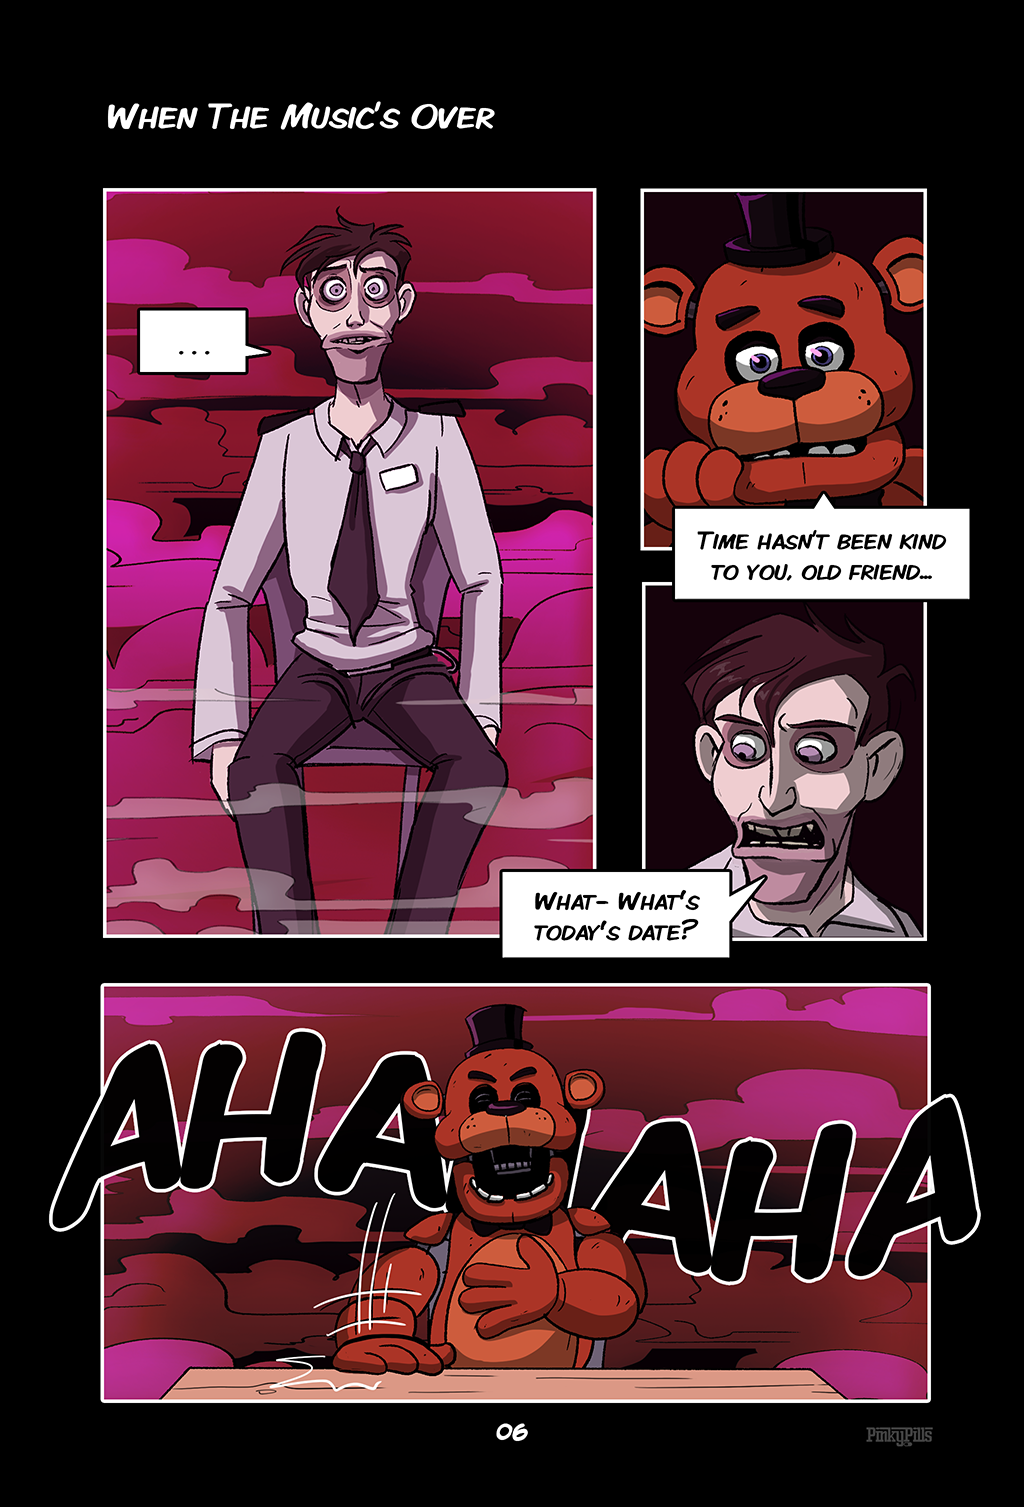 FNaF:SB / Ruin] Heir of the Hare pt.1 by BarBADroid on DeviantArt